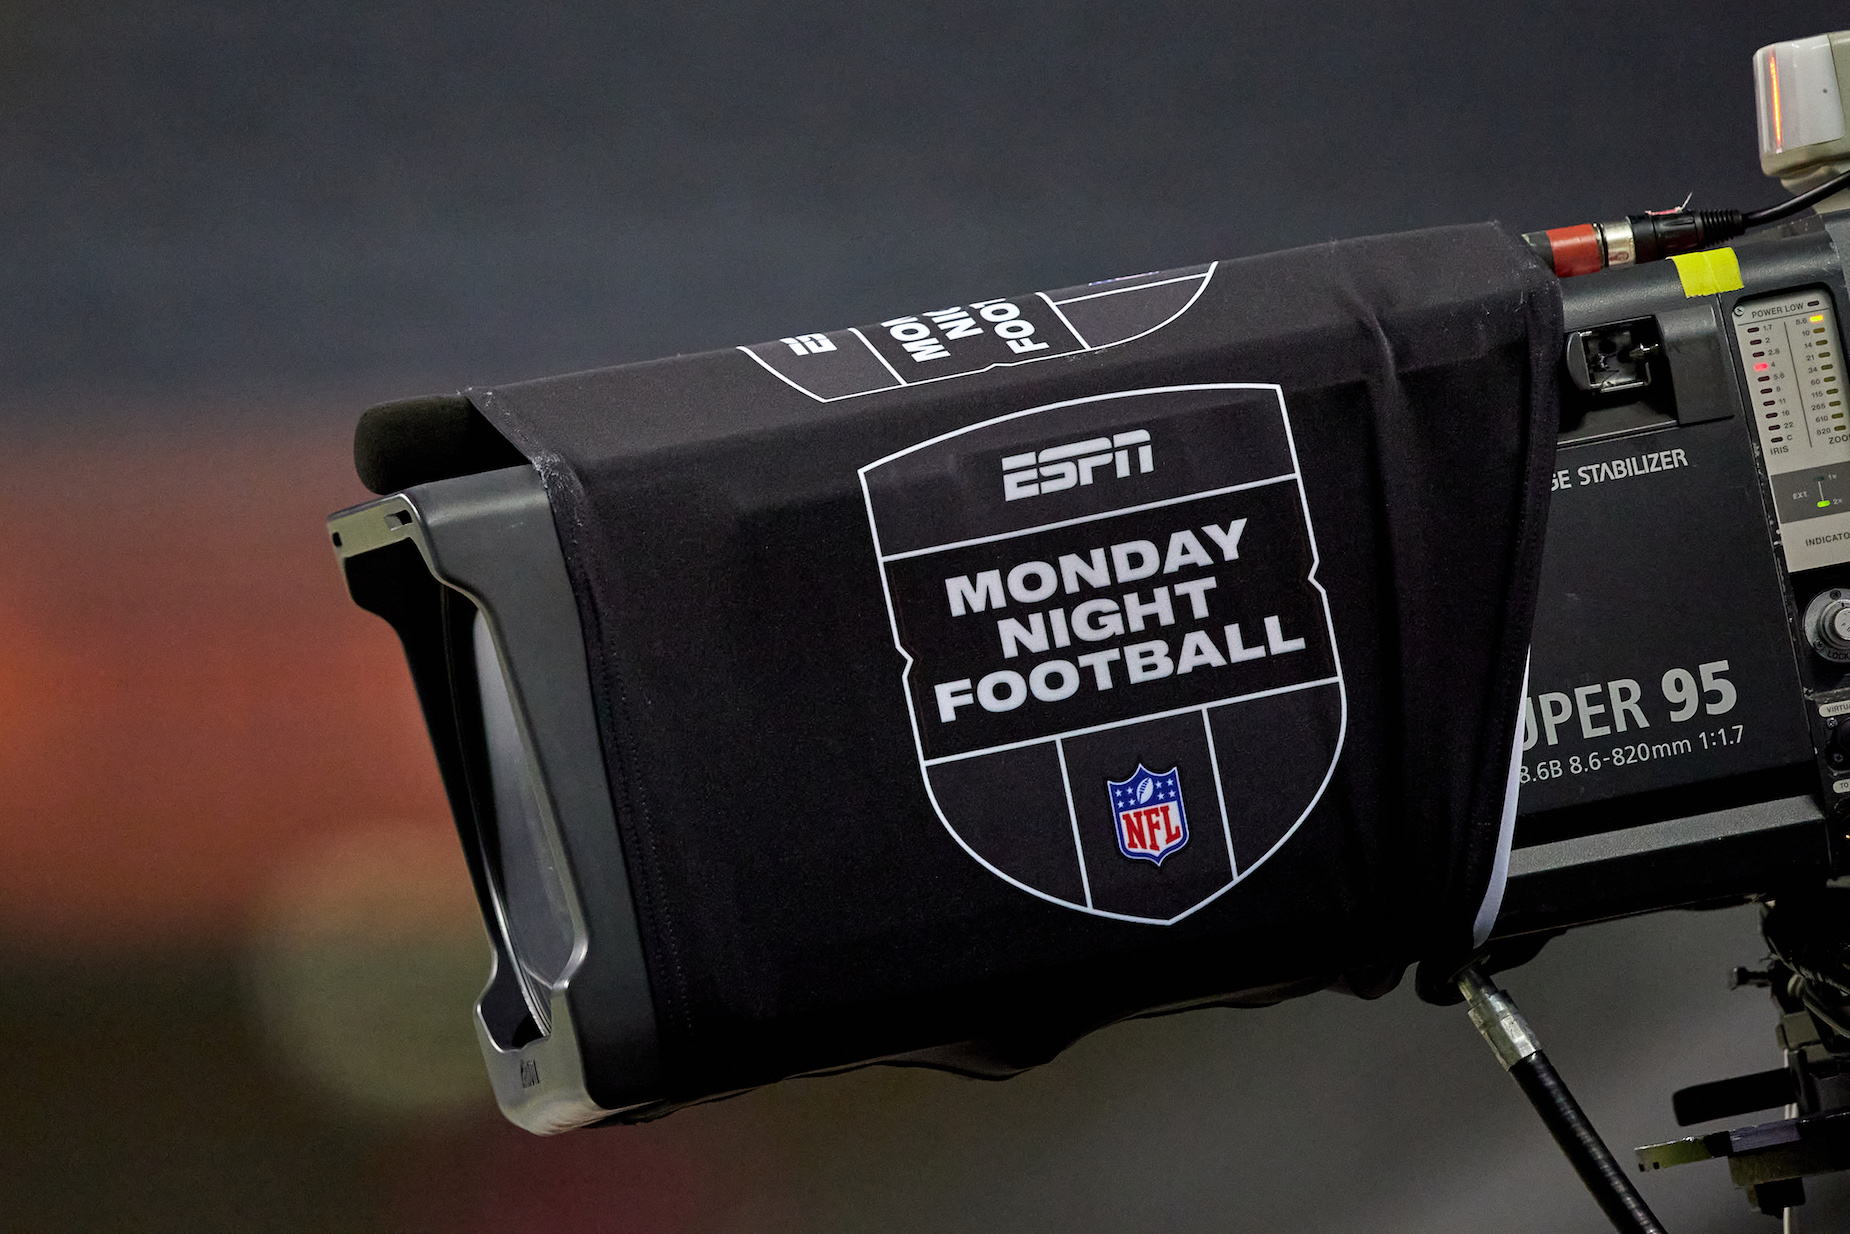 is there a monday night football game tomorrow night